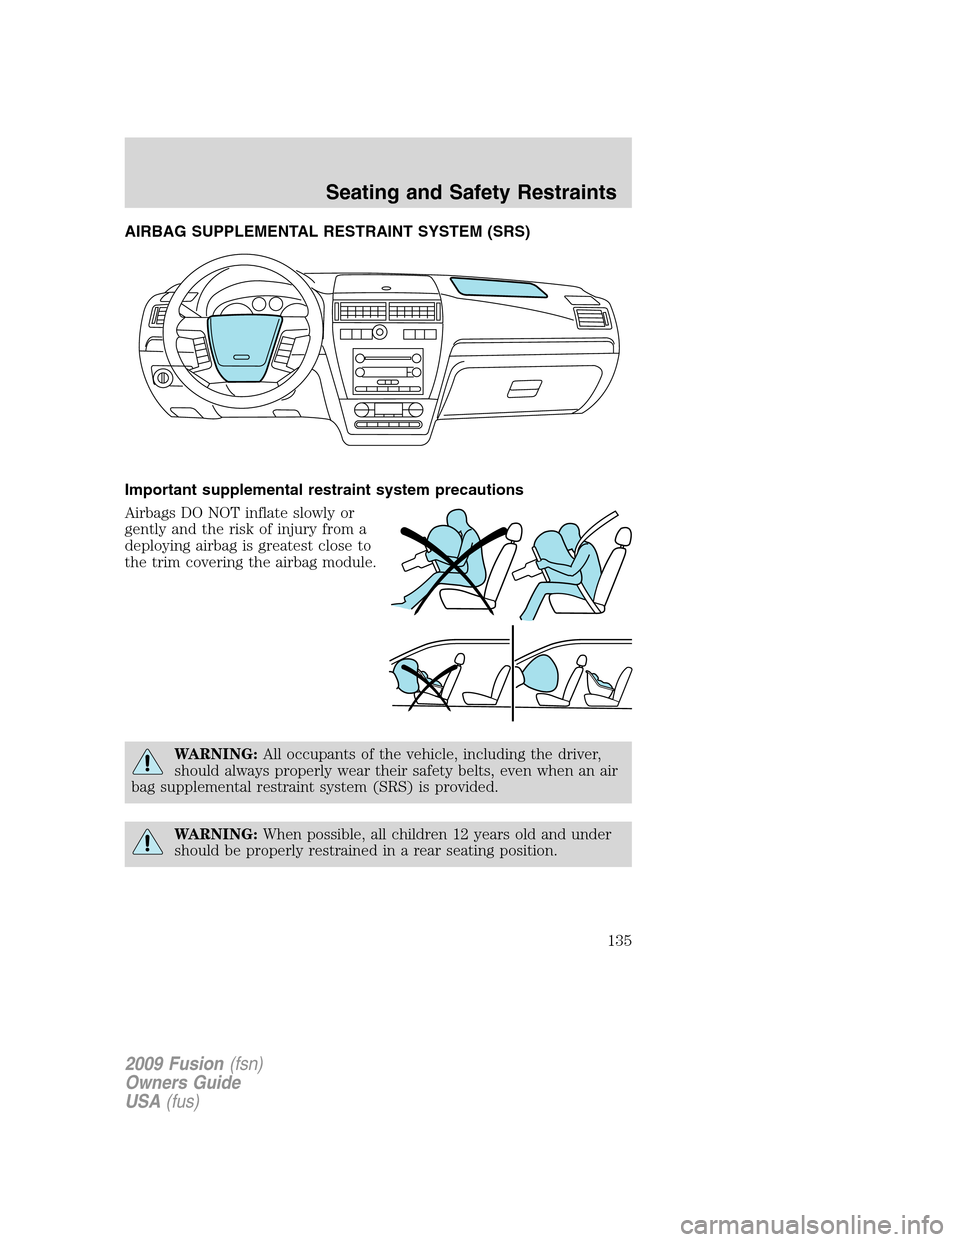 FORD FUSION (AMERICAS) 2009 1.G User Guide AIRBAG SUPPLEMENTAL RESTRAINT SYSTEM (SRS)
Important supplemental restraint system precautions
Airbags DO NOT inflate slowly or
gently and the risk of injury from a
deploying airbag is greatest close 